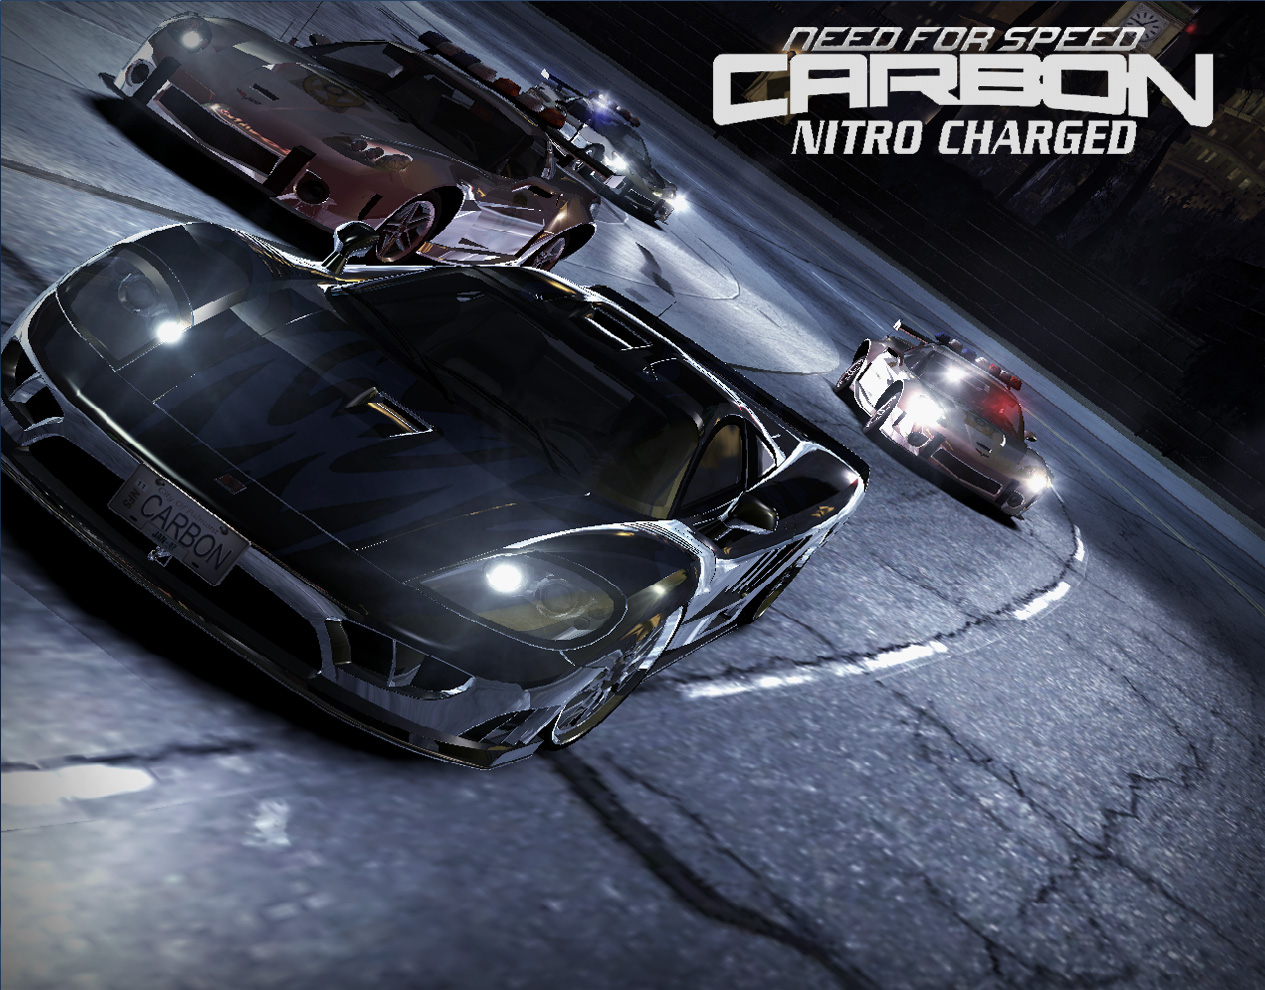 Need for Speed Carbon Nitro Charged wallpaper 2 by Rainbow-Dash-Rockz